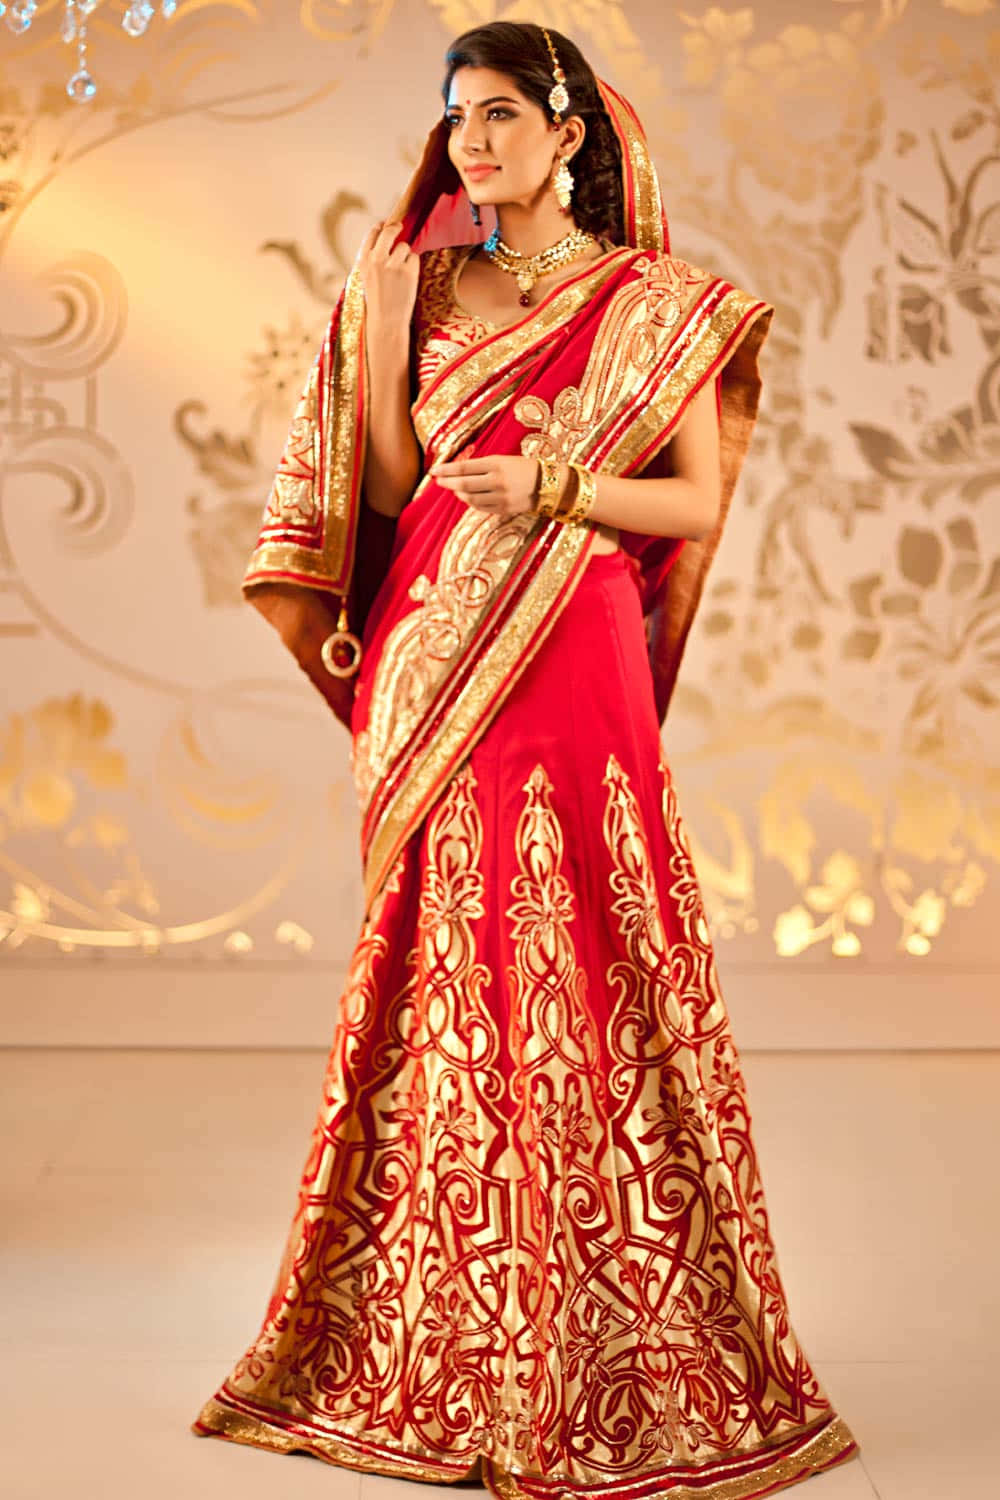 A Woman In Red And Gold Sari